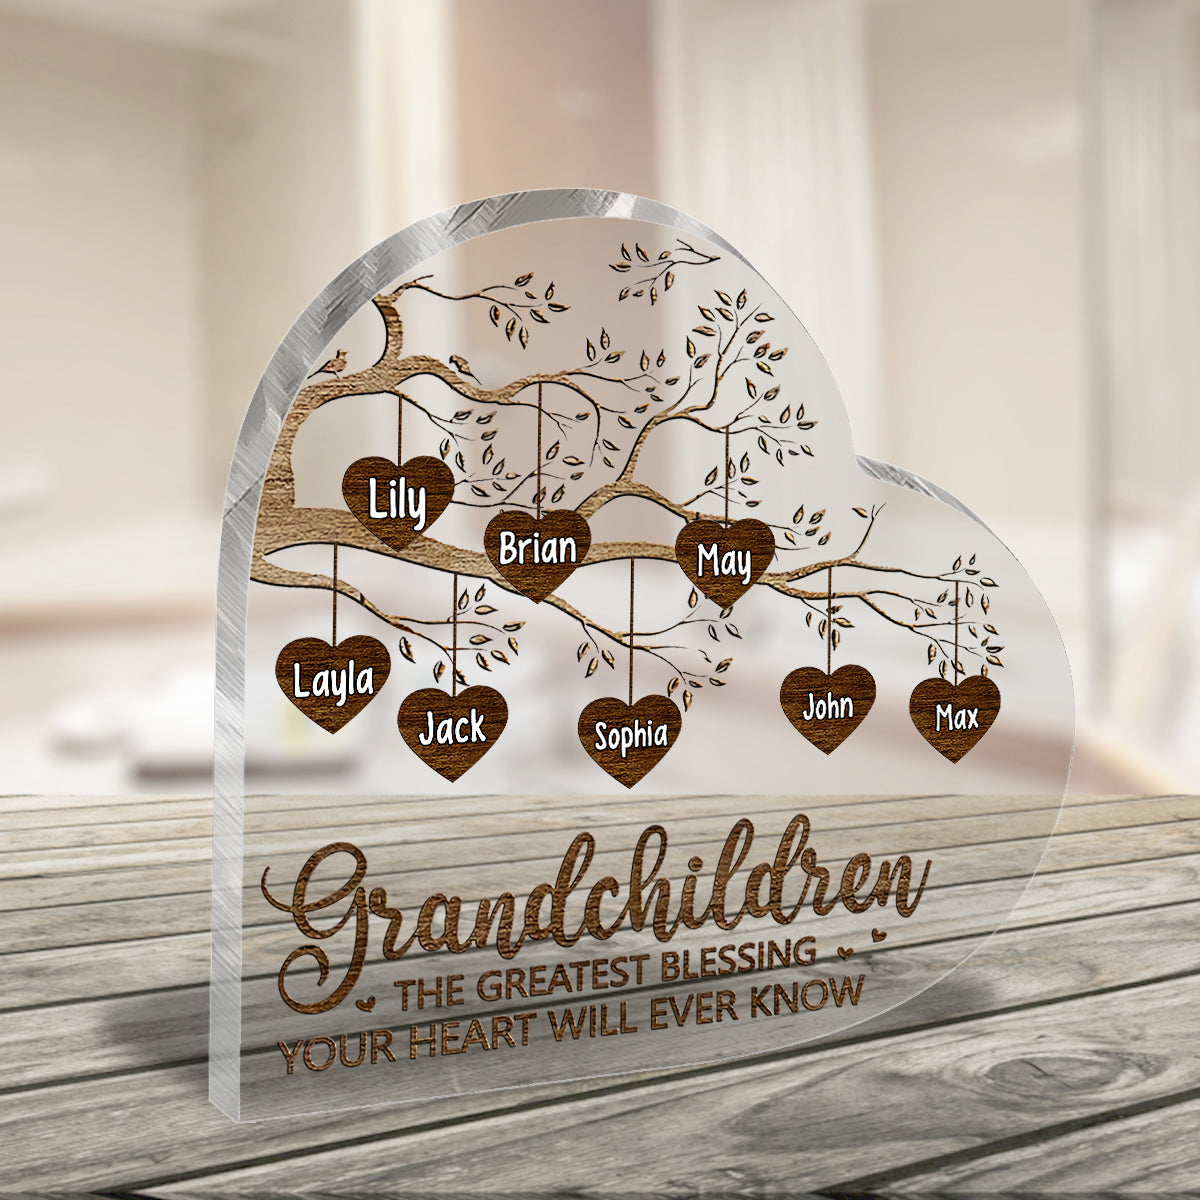 Grandkids Make Life More Grand - Personalized Mother's Day Grandma Custom Shaped Acrylic Plaque